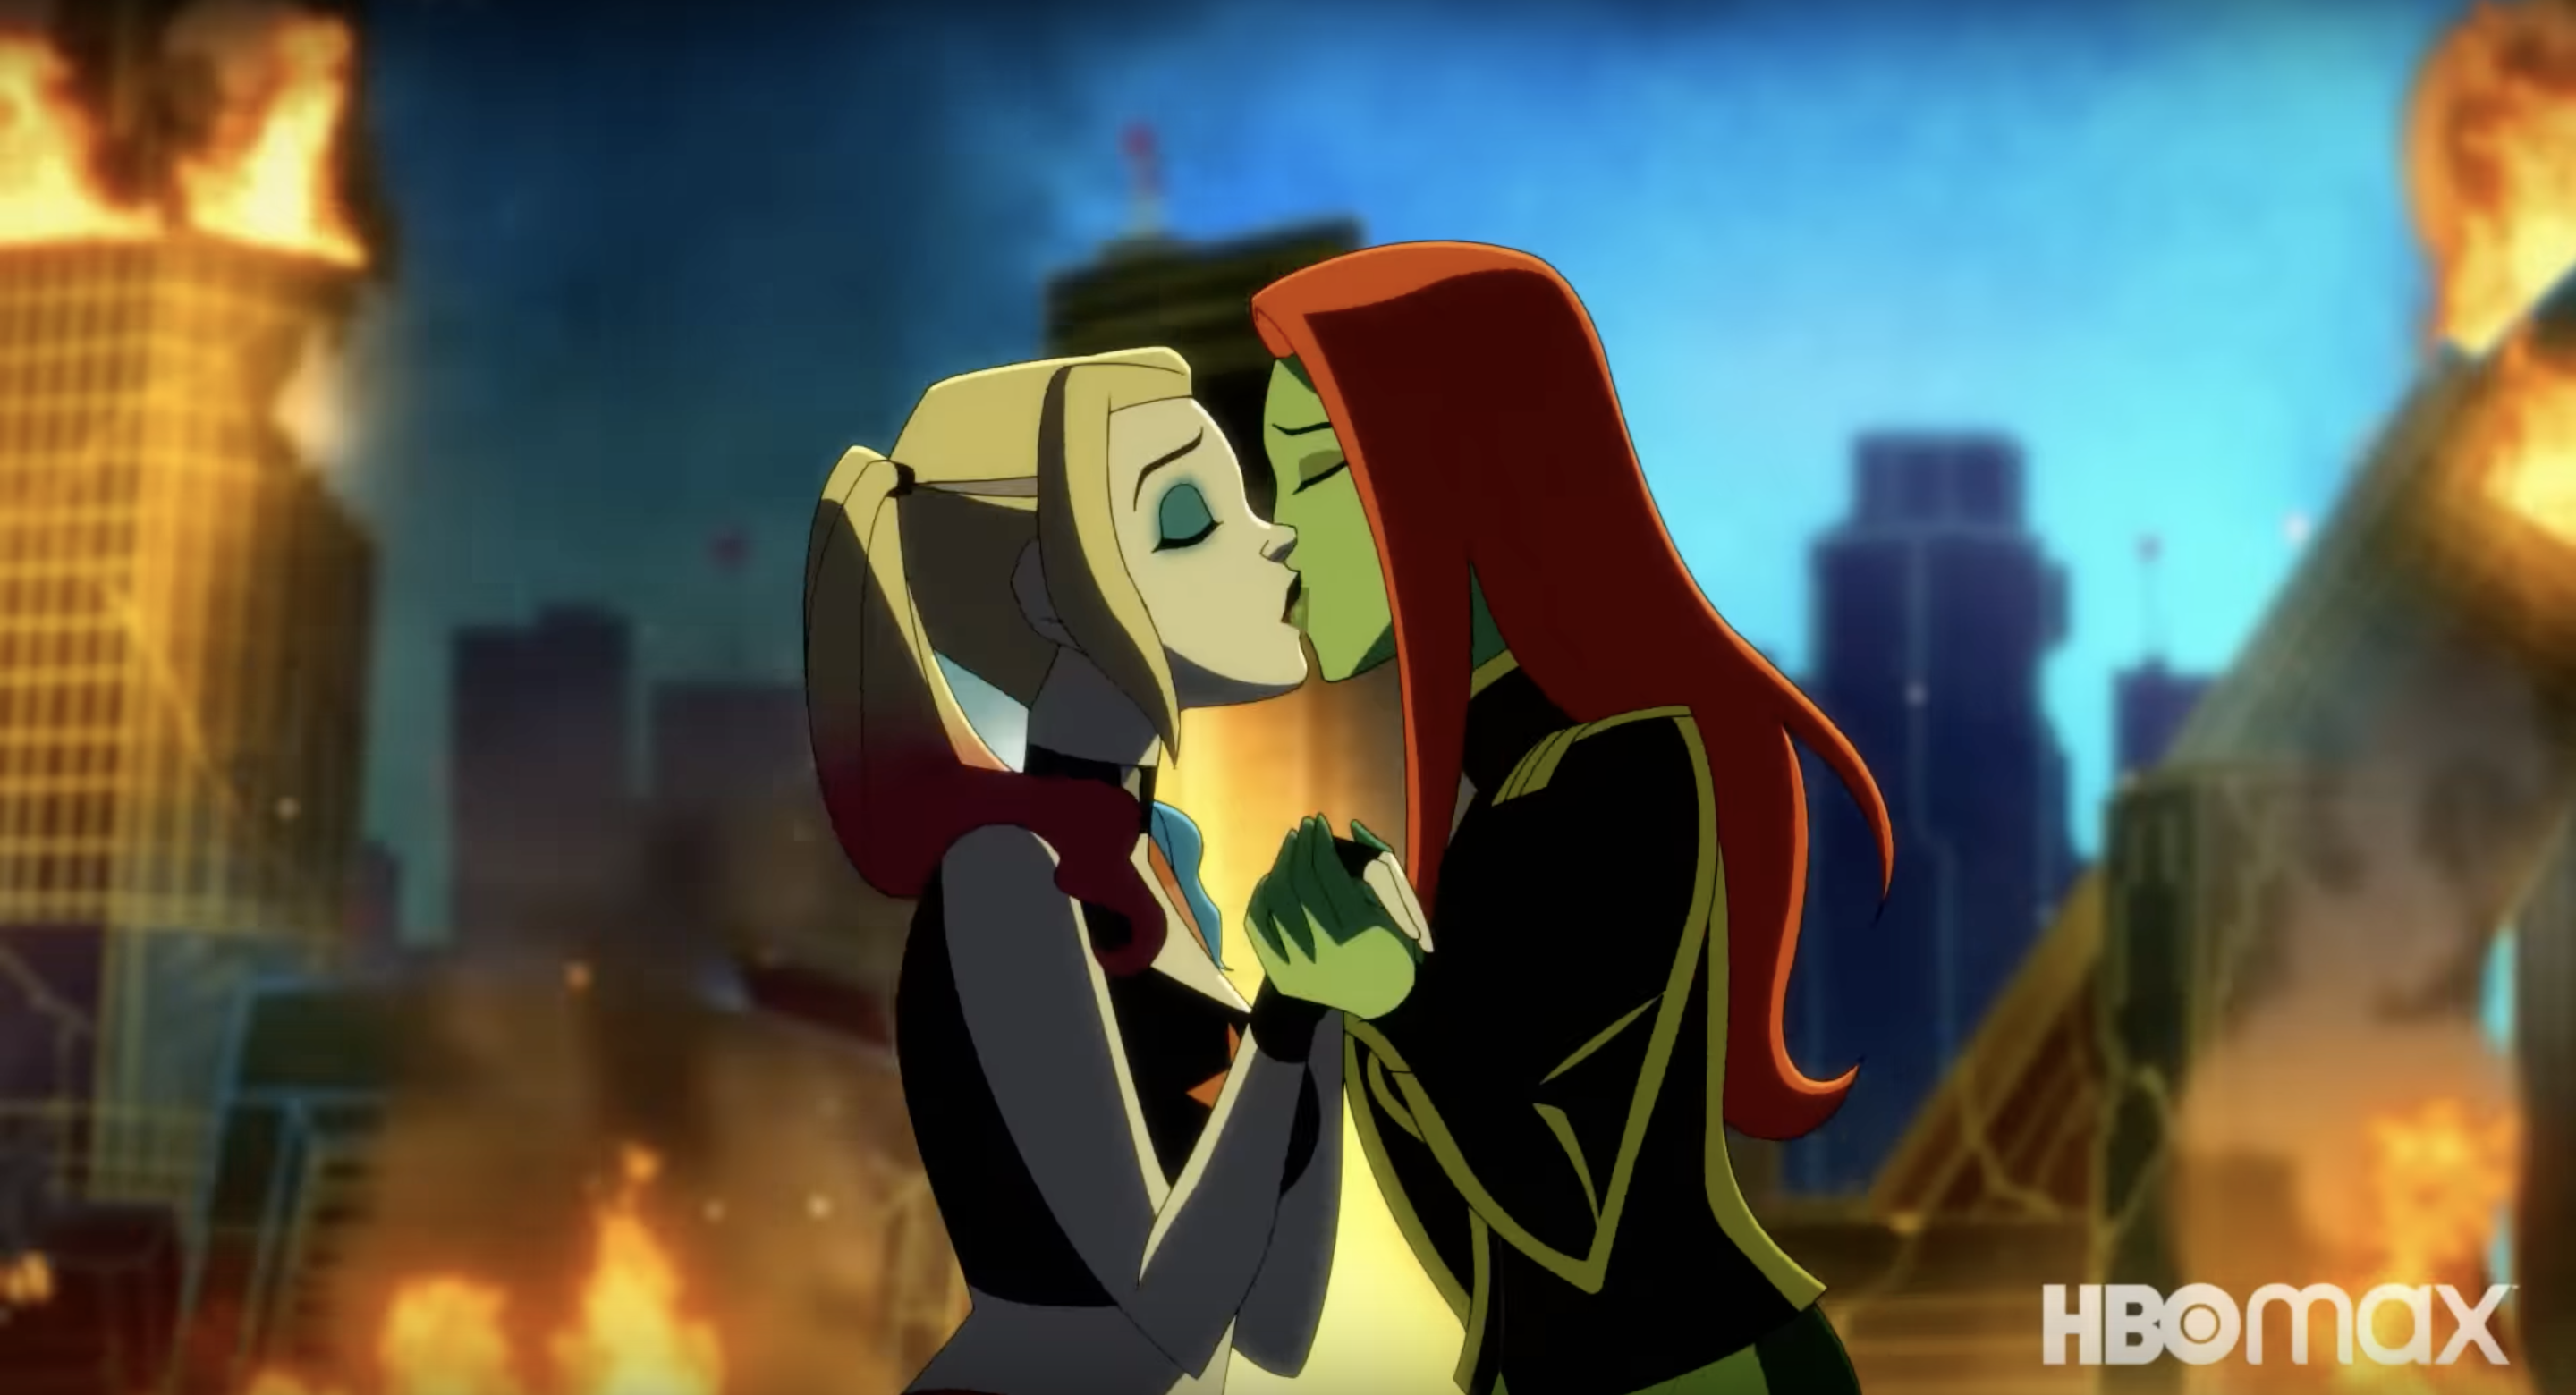 ‘Harley Quinn’ Valentine’s Day special trailer reveals she’s so good at sex that it’s a problem